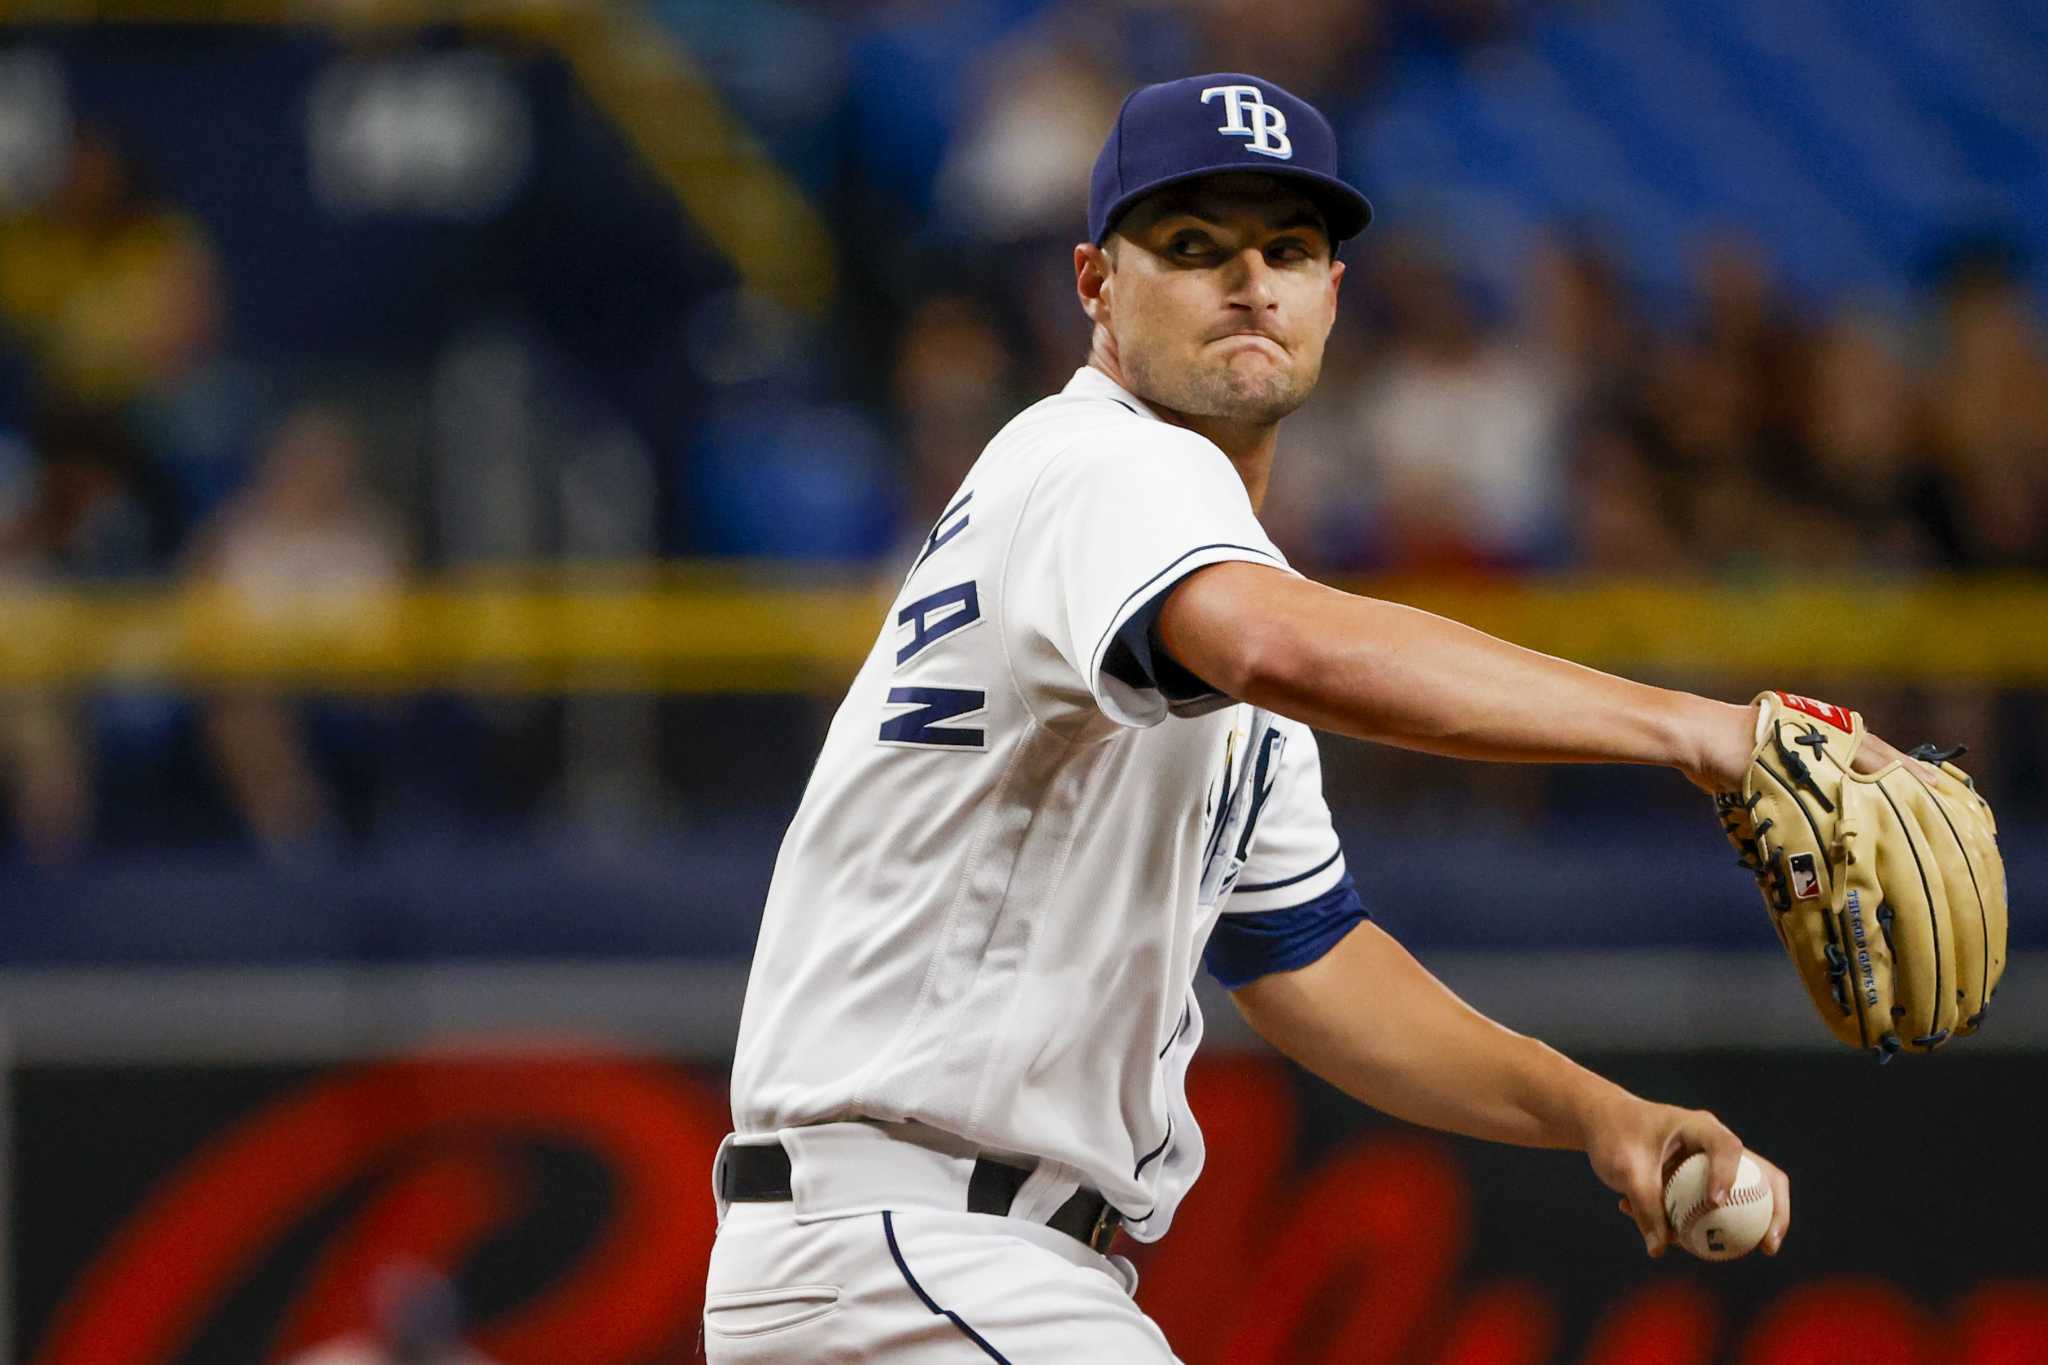 MLB All-Star Game: Rays' Shane McClanahan to start for AL